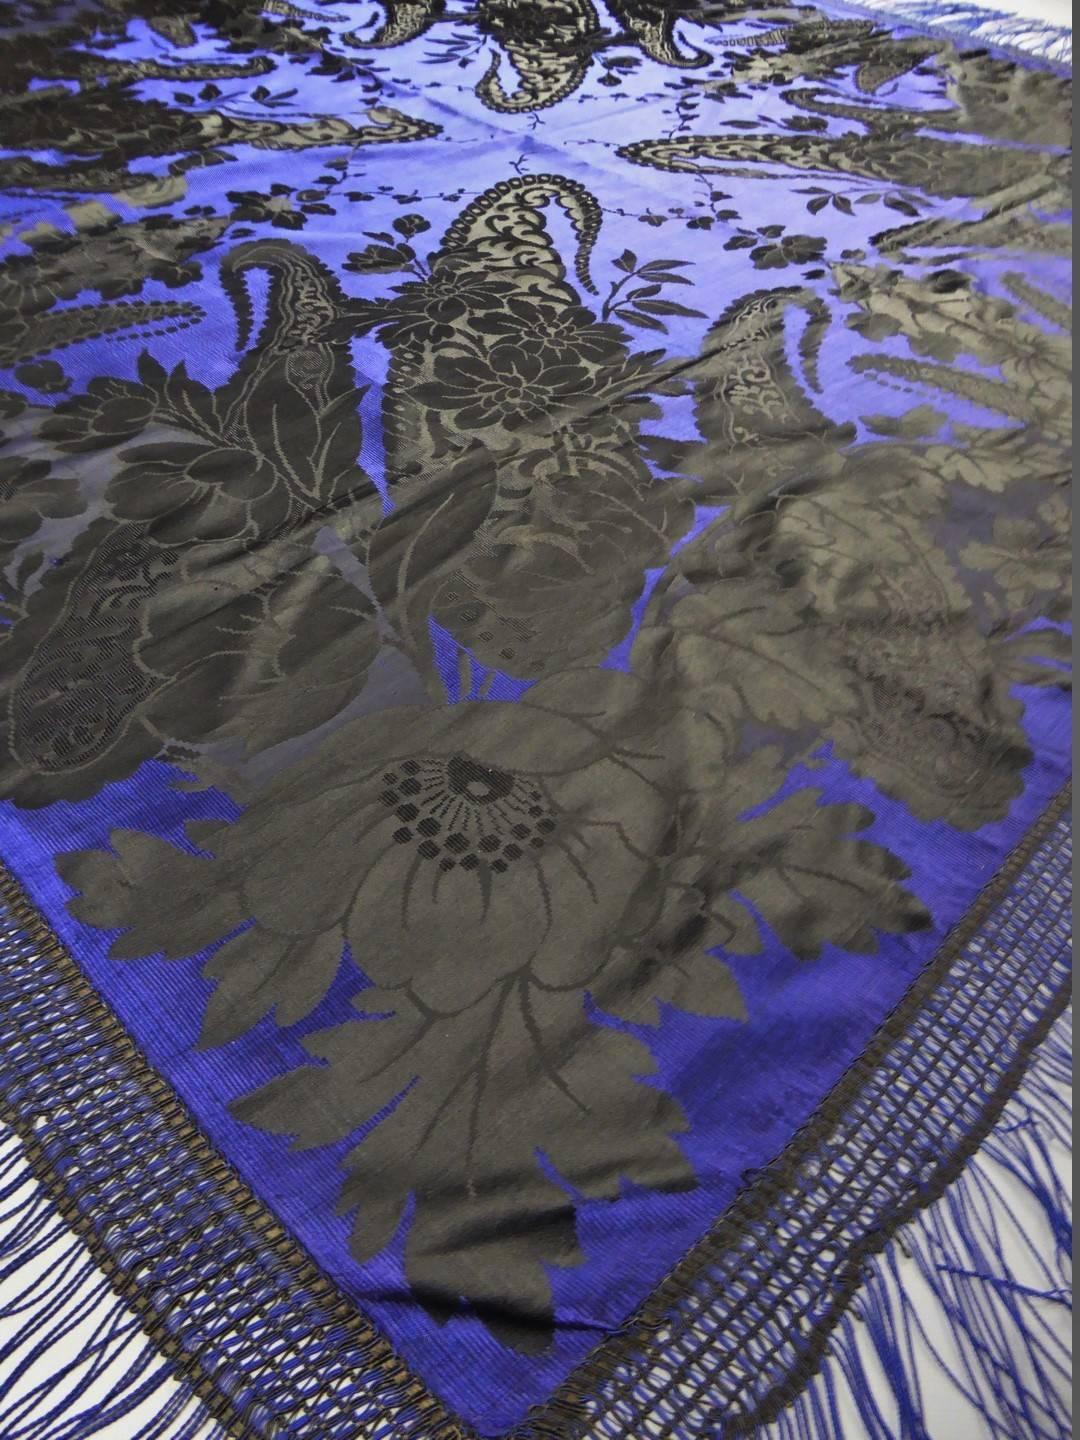 Circa 1860

Europe - Russia (?)

Large bourgeois shawl in black damask silk on electric blue Gros de Tours around 1860. On the reverse, reversible  weaving on the quart (without floating weft) with ribbed effects with matt and shiny damask effects.